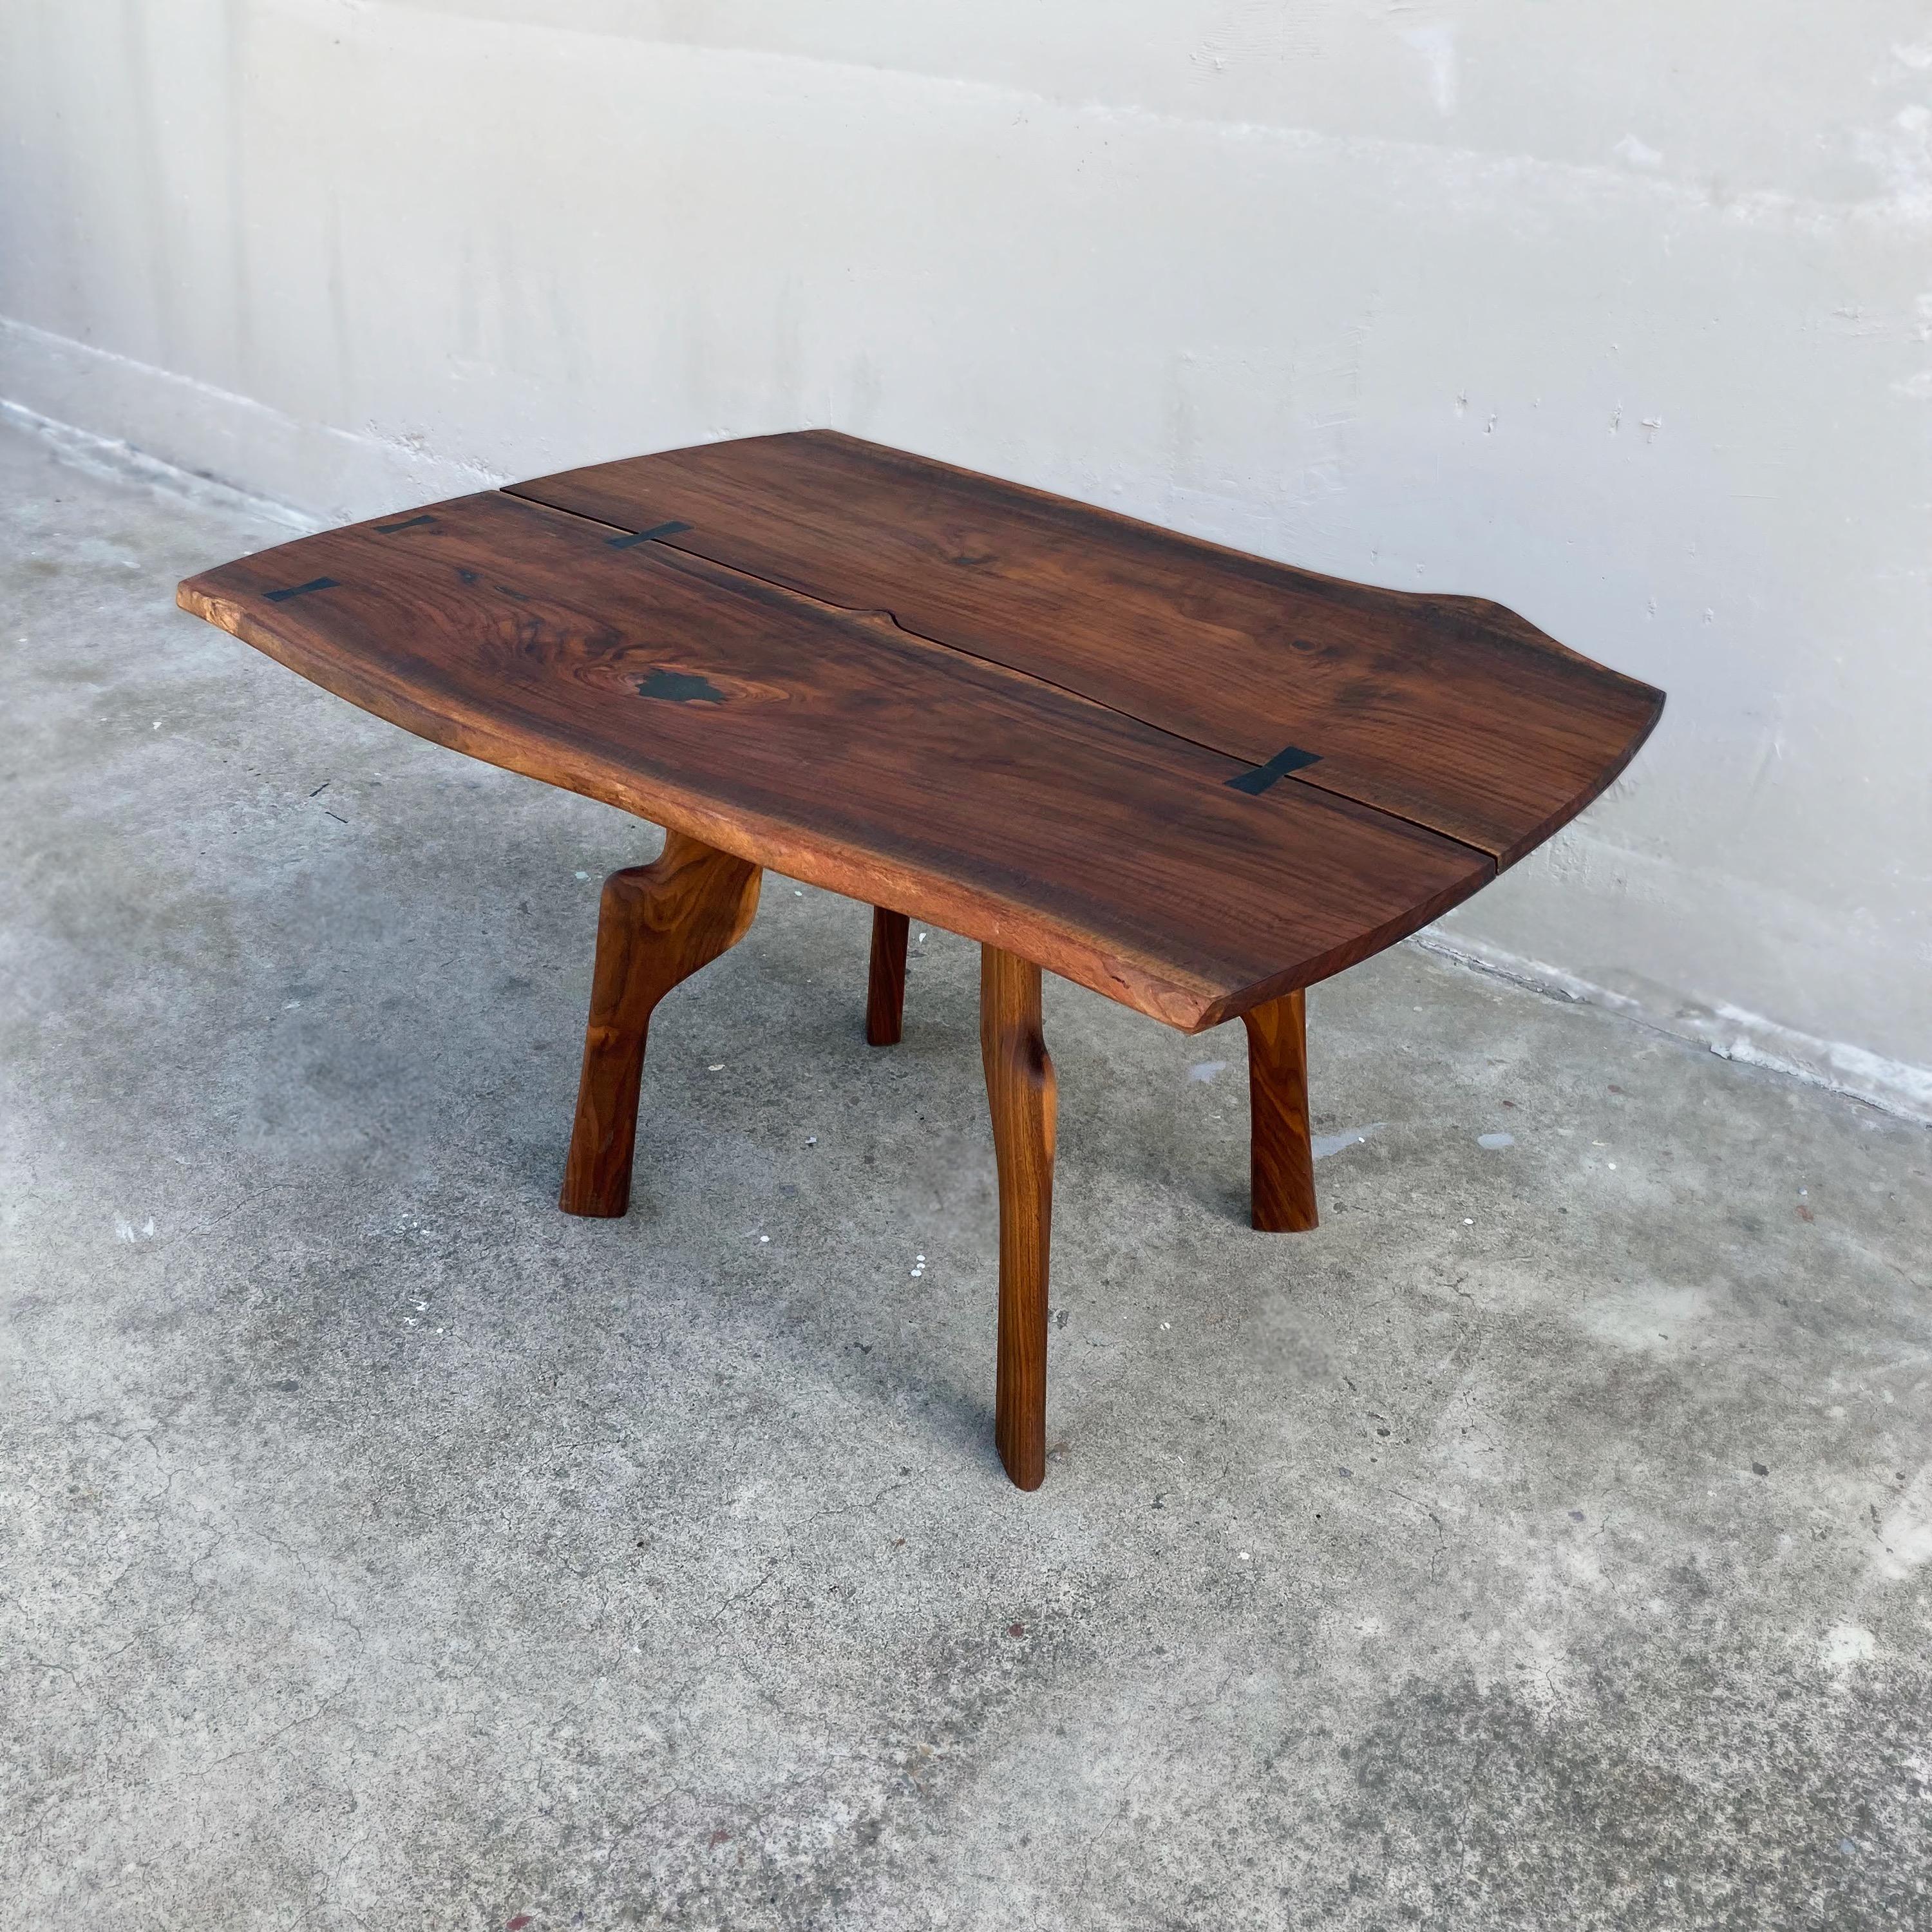 This walnut table was designed prior to the birth of our lead artist and CEO Sung Kim’s son.
